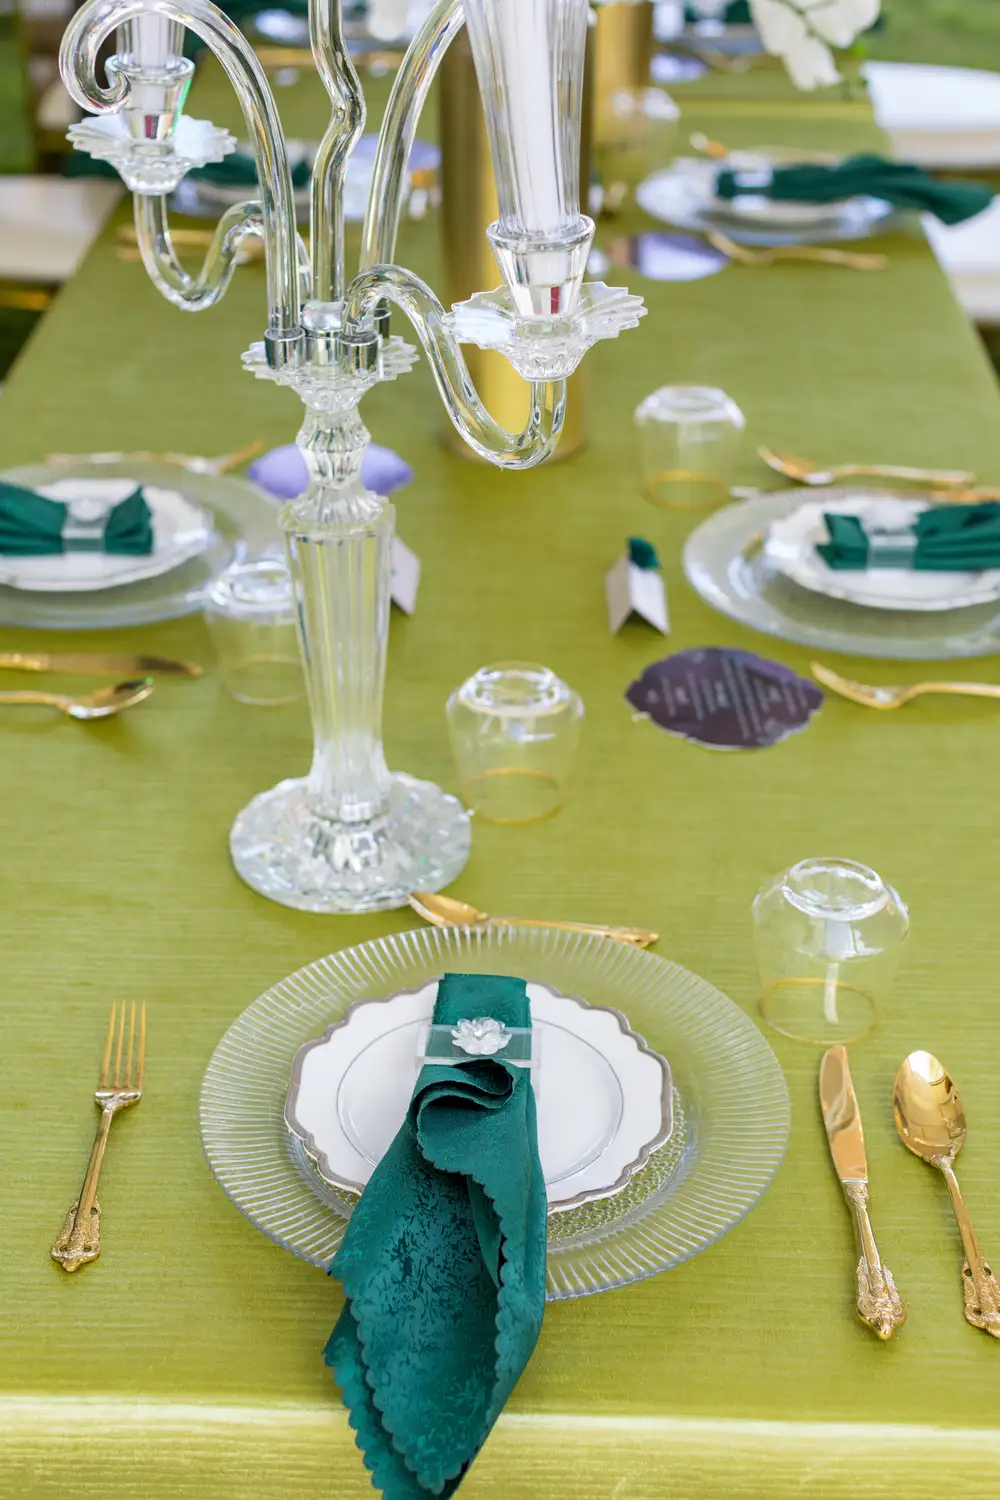 Glassware and cutlery